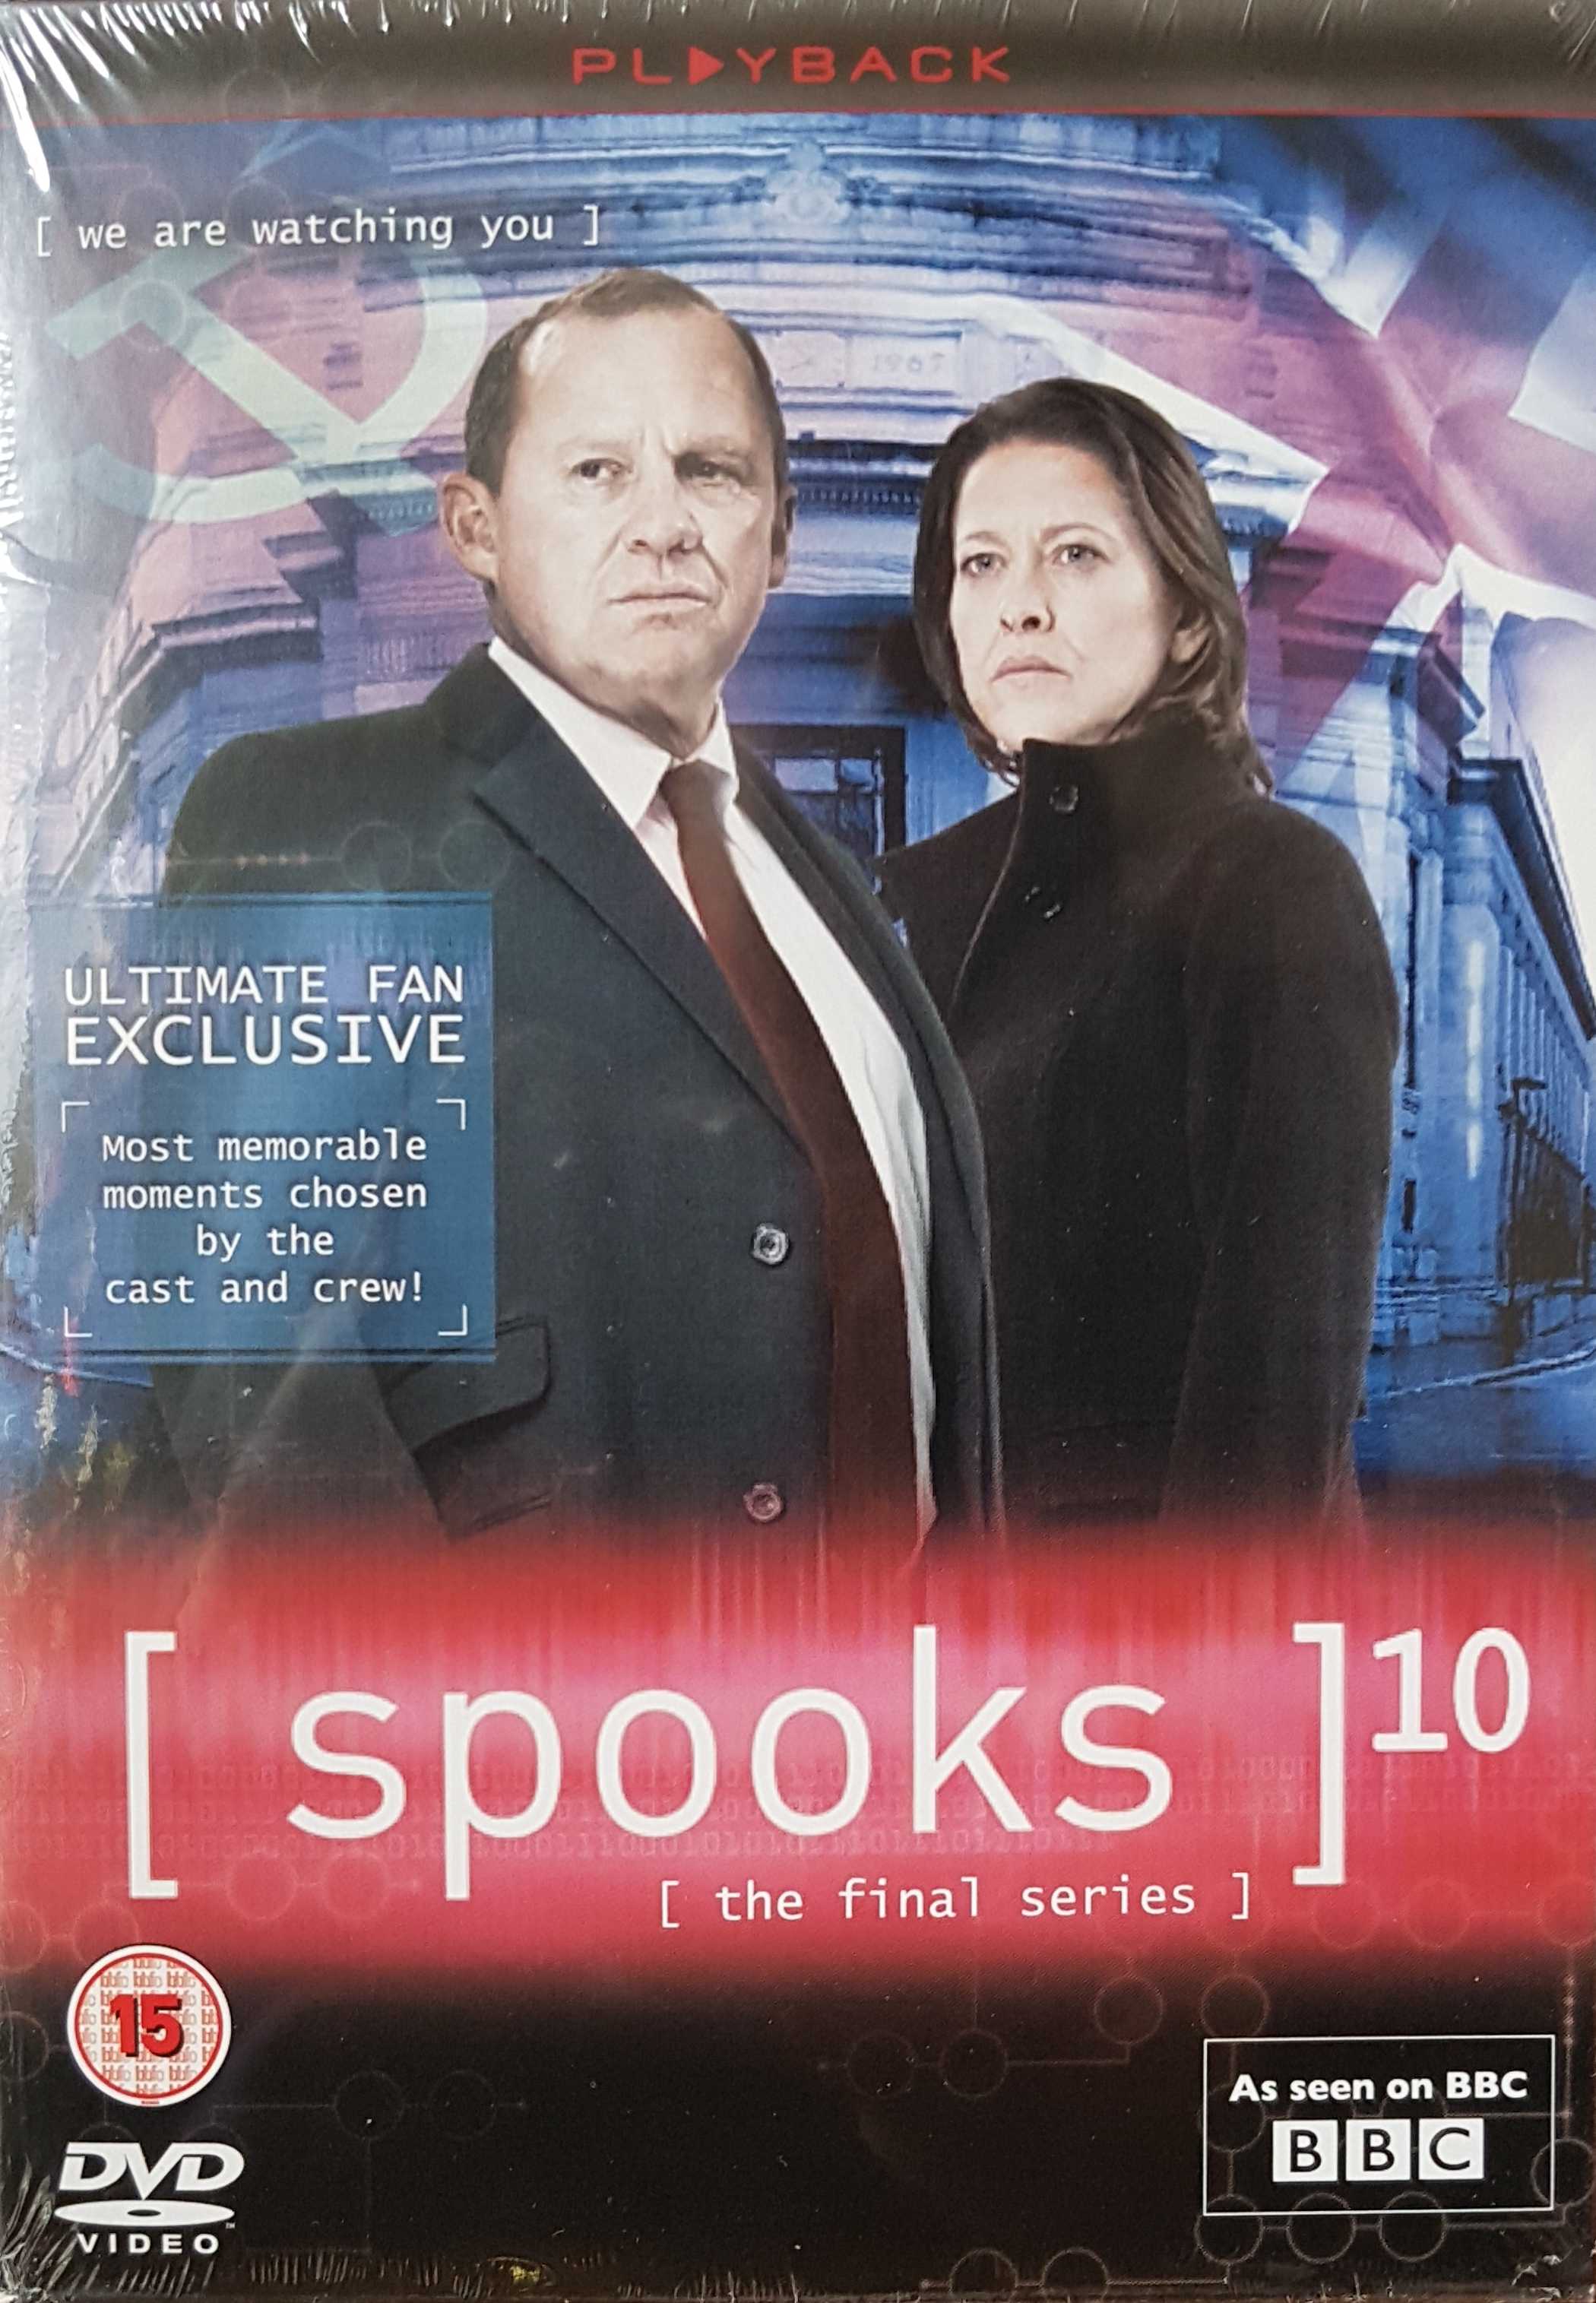 Picture of 828 623 0 [ spooks ]10 by artist Jonathan Brackley / Sam Vincent / Sean Cook / Anthony Neilson from the BBC records and Tapes library